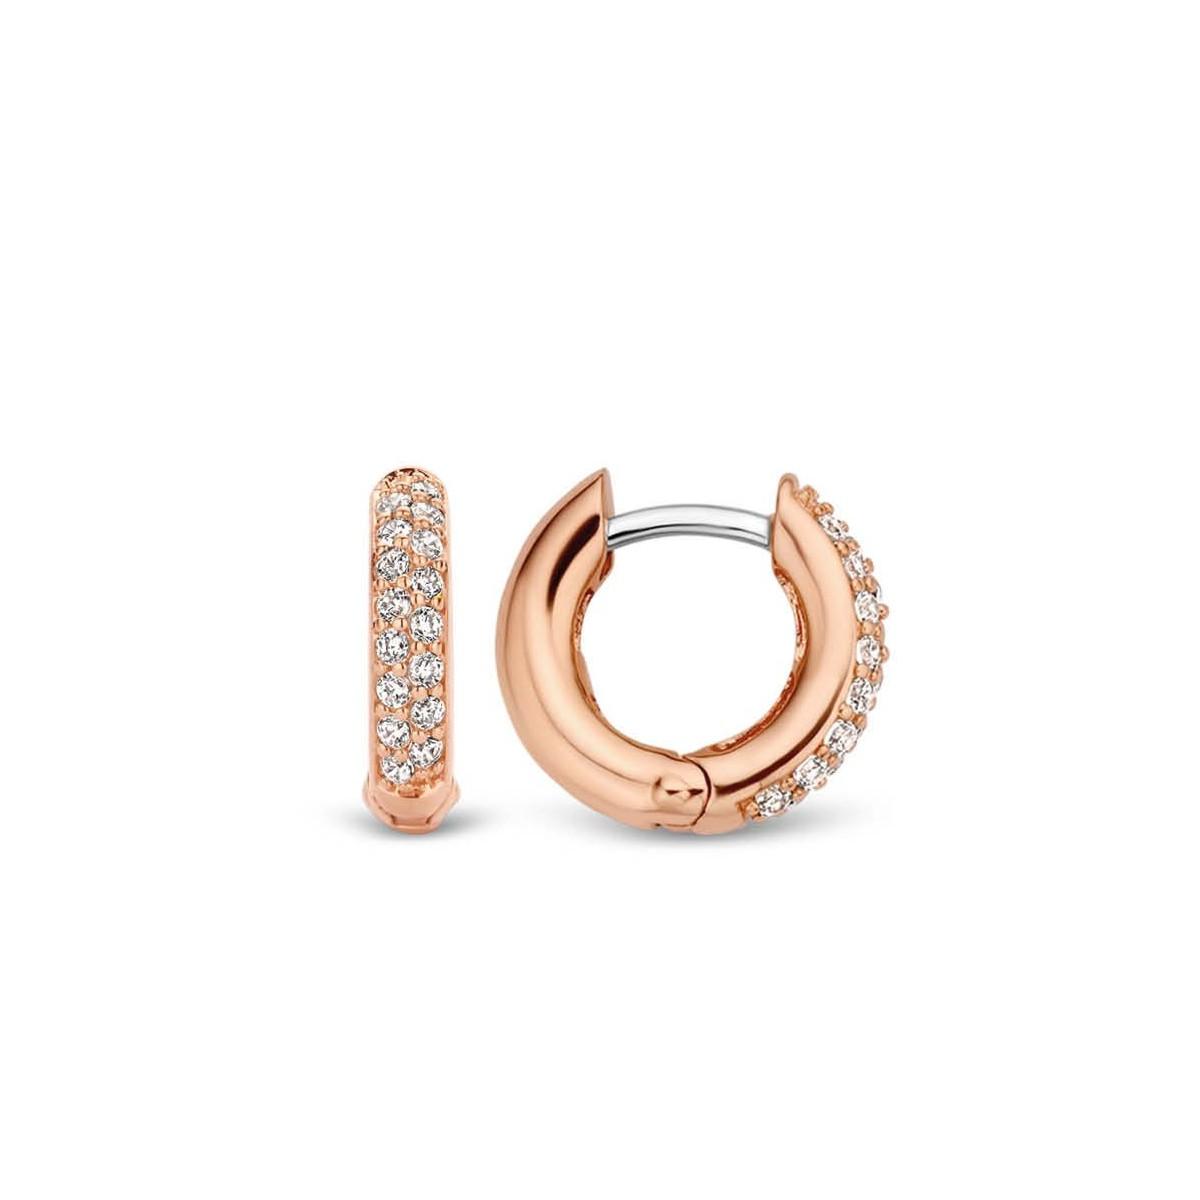 TI SENTO ROSE GOLD-PLATED SILVER EARRINGS 7210ZR